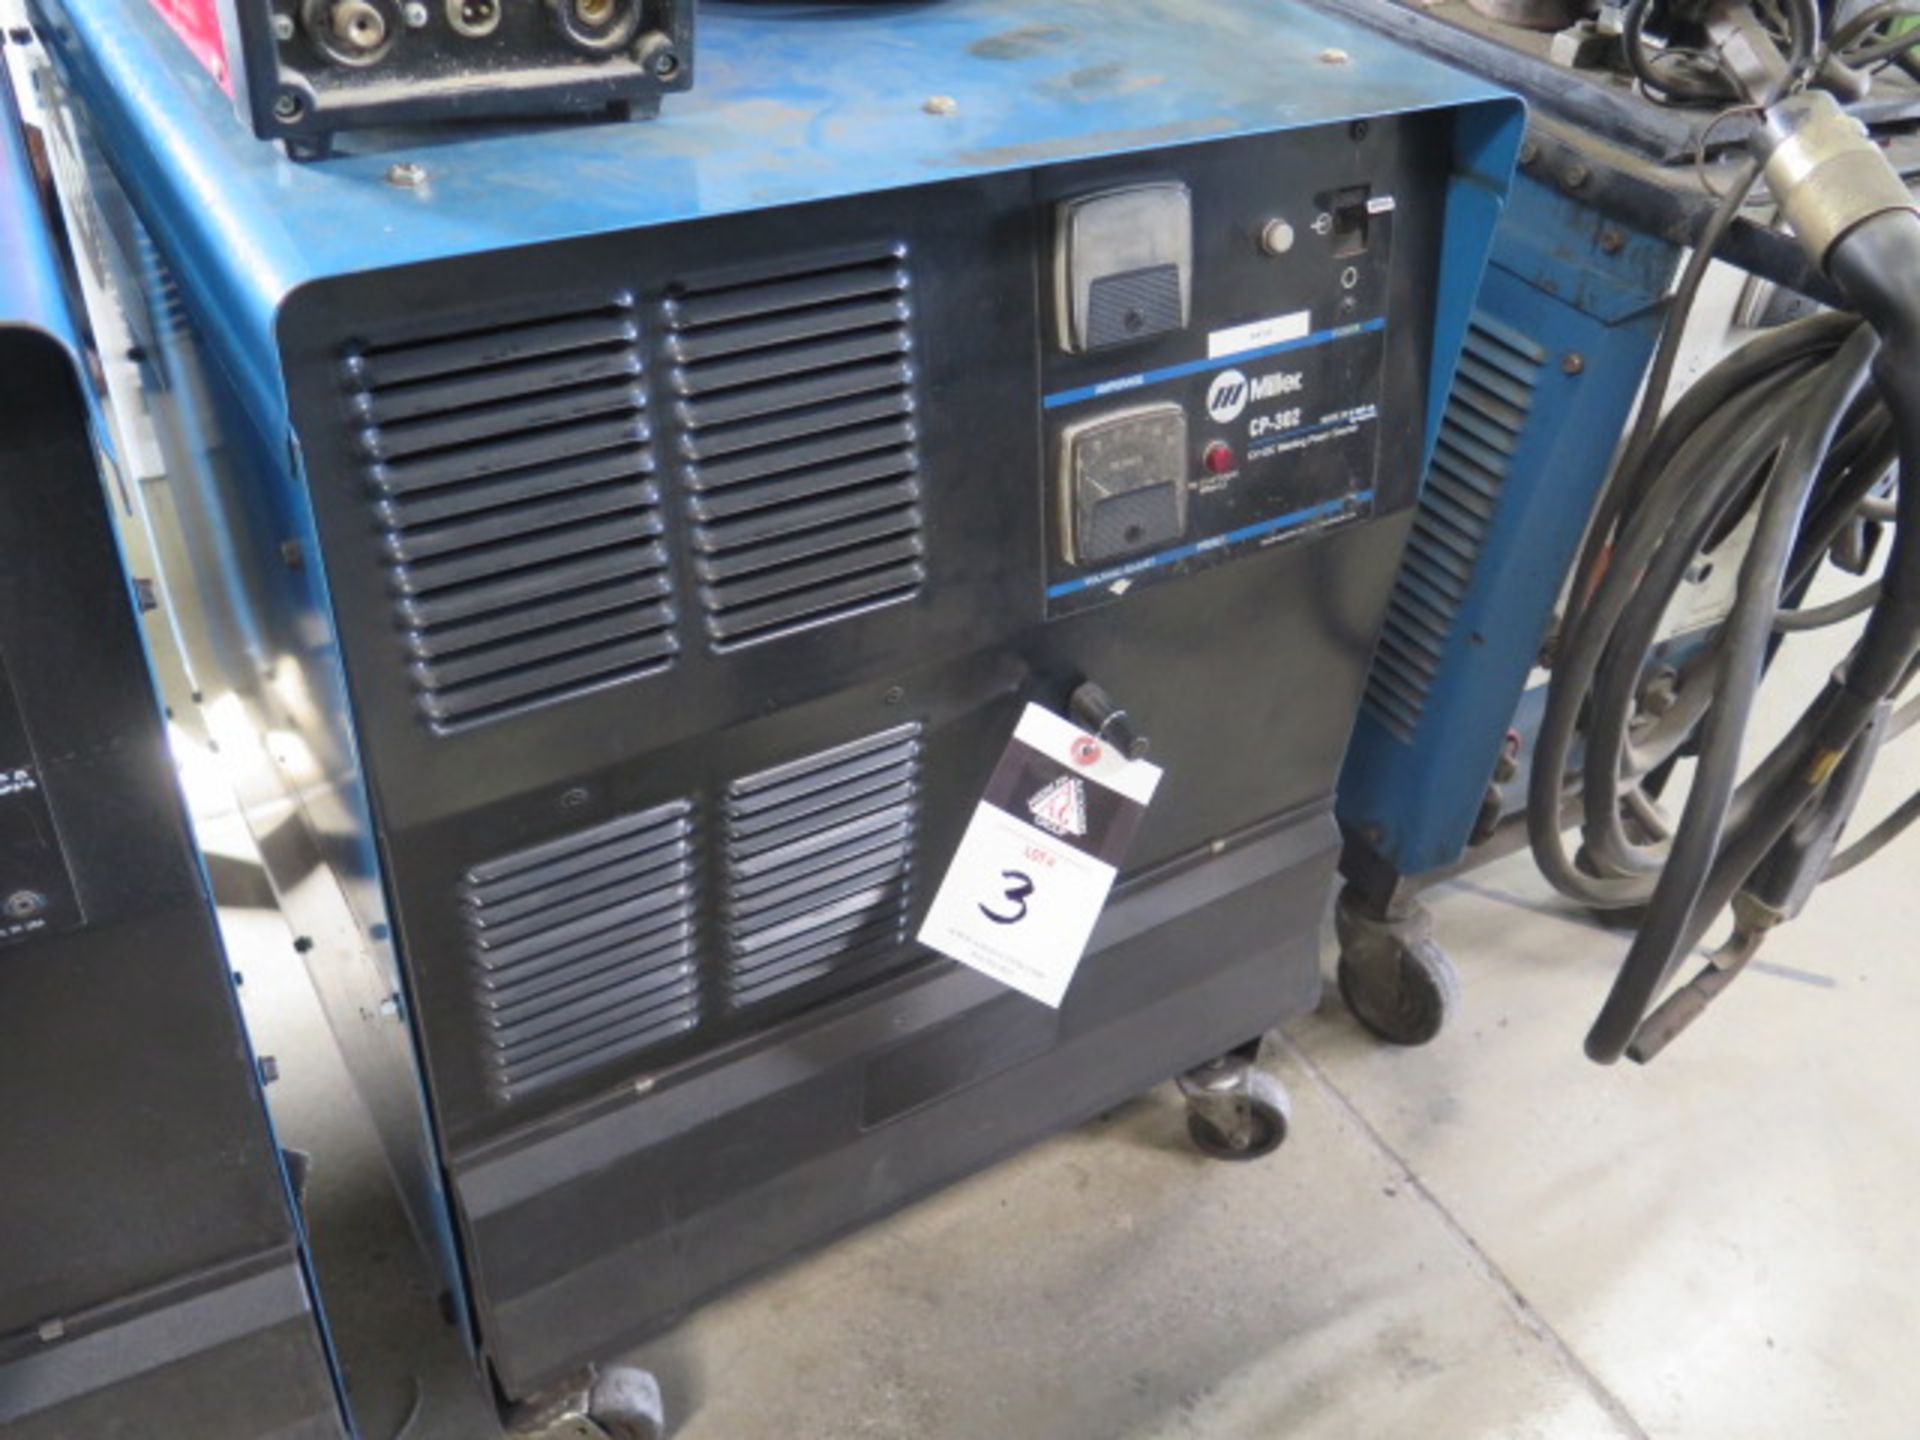 Miller CP-302 CV-DC Arc Welding Power Source (SOLD AS-IS - NO WARRANTY) - Image 3 of 4